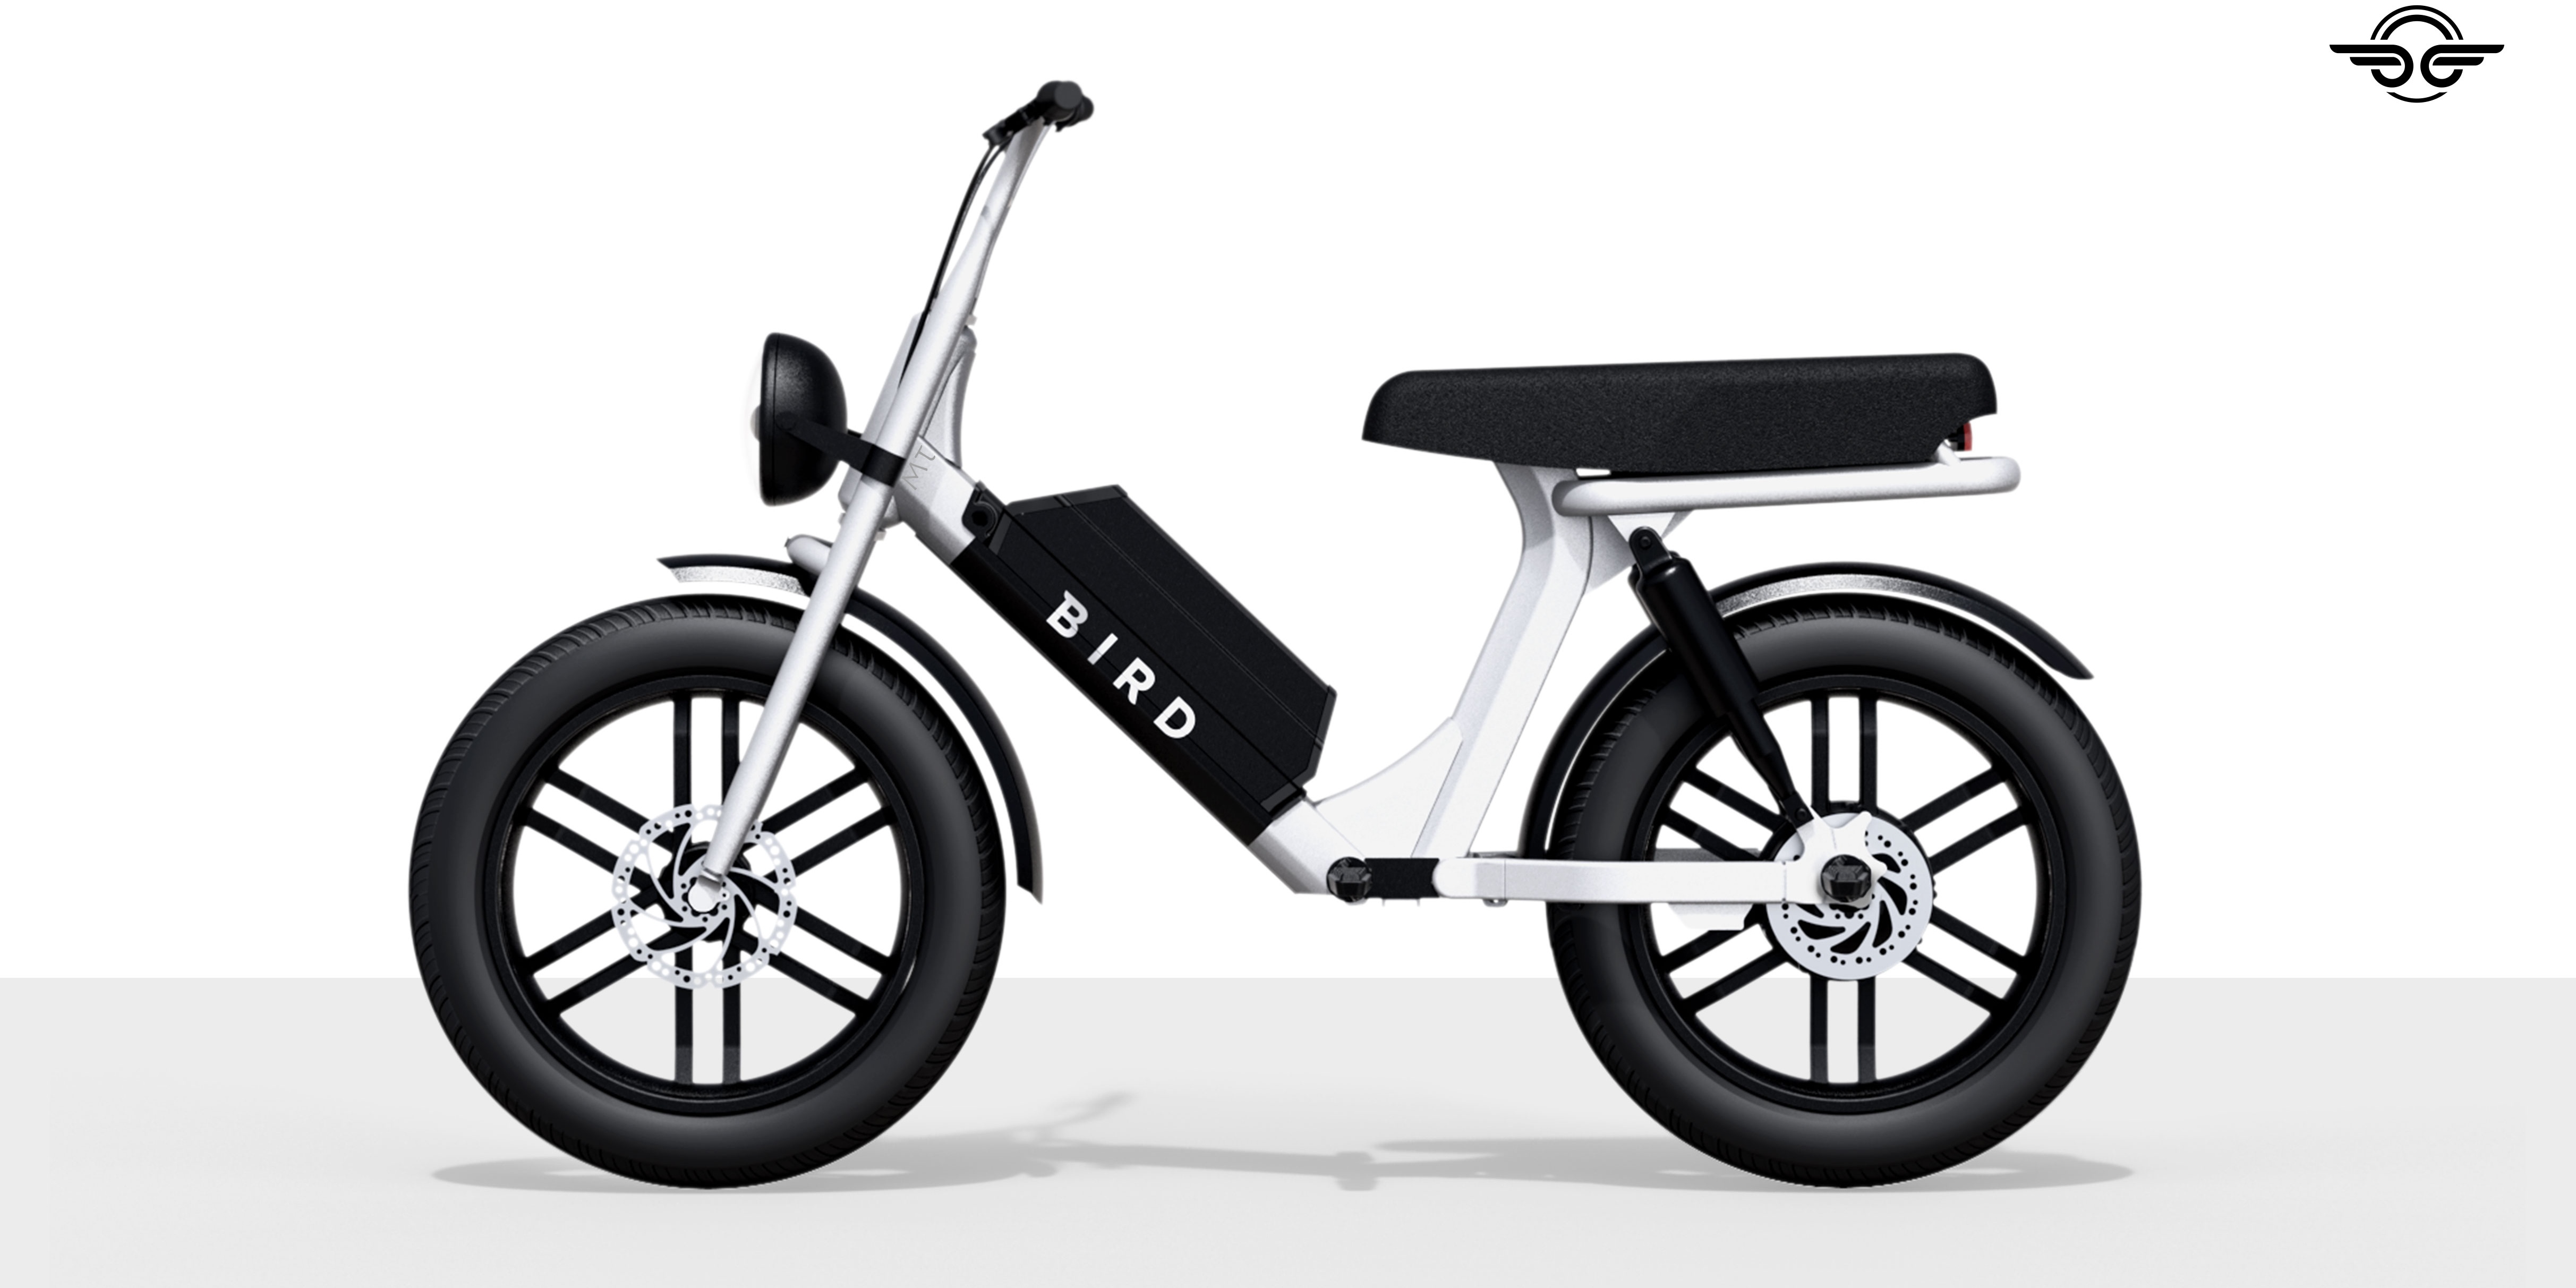 moped-style electric bicycle 